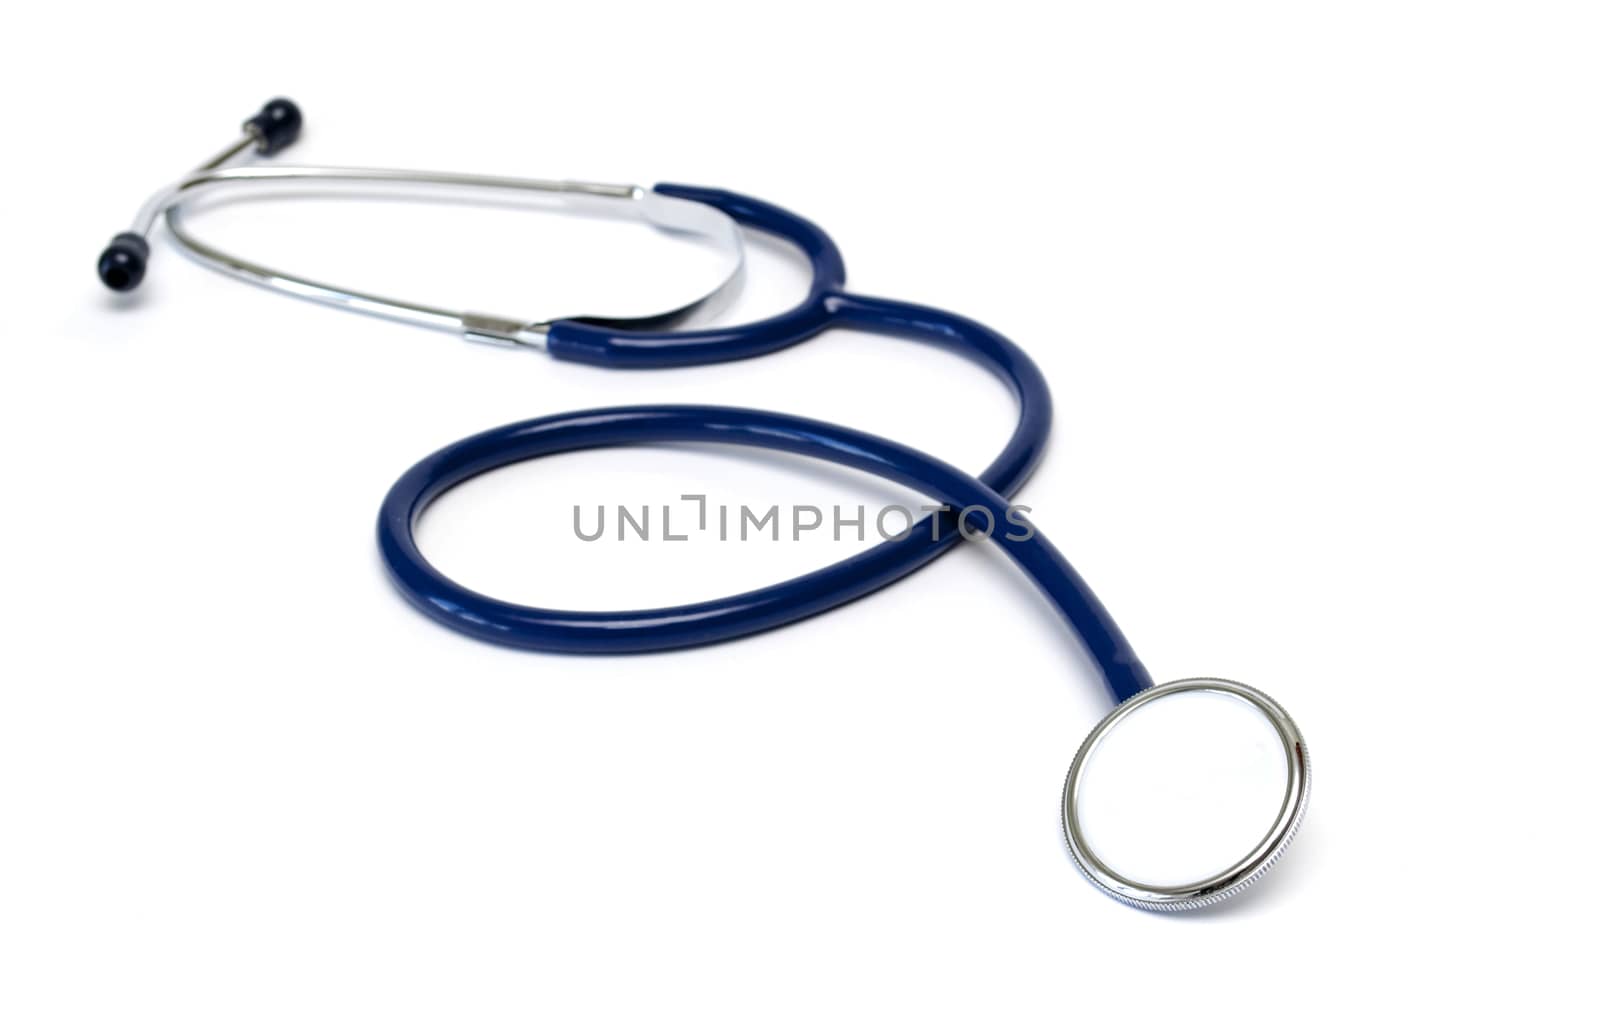 Stethoscope on a white background. Medical instrument.